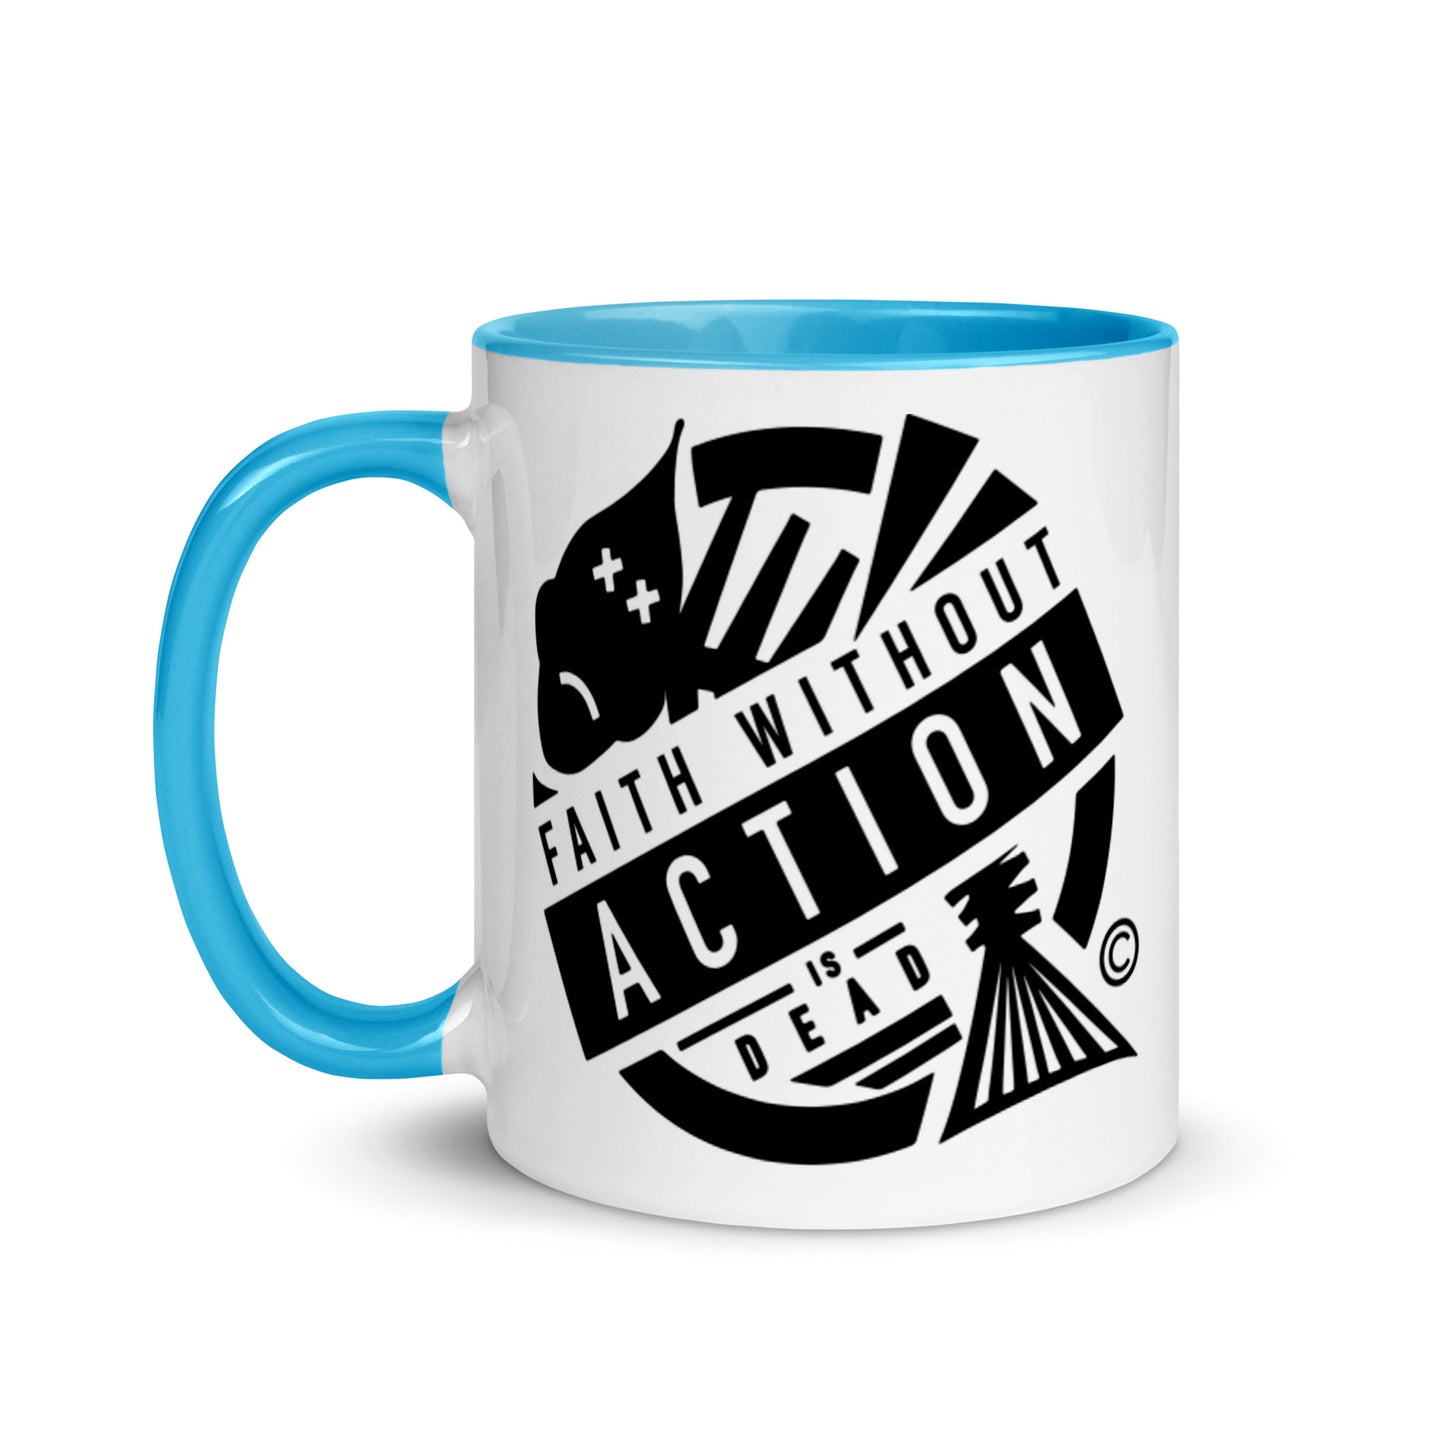 Faith Without Action Mug with Color Inside